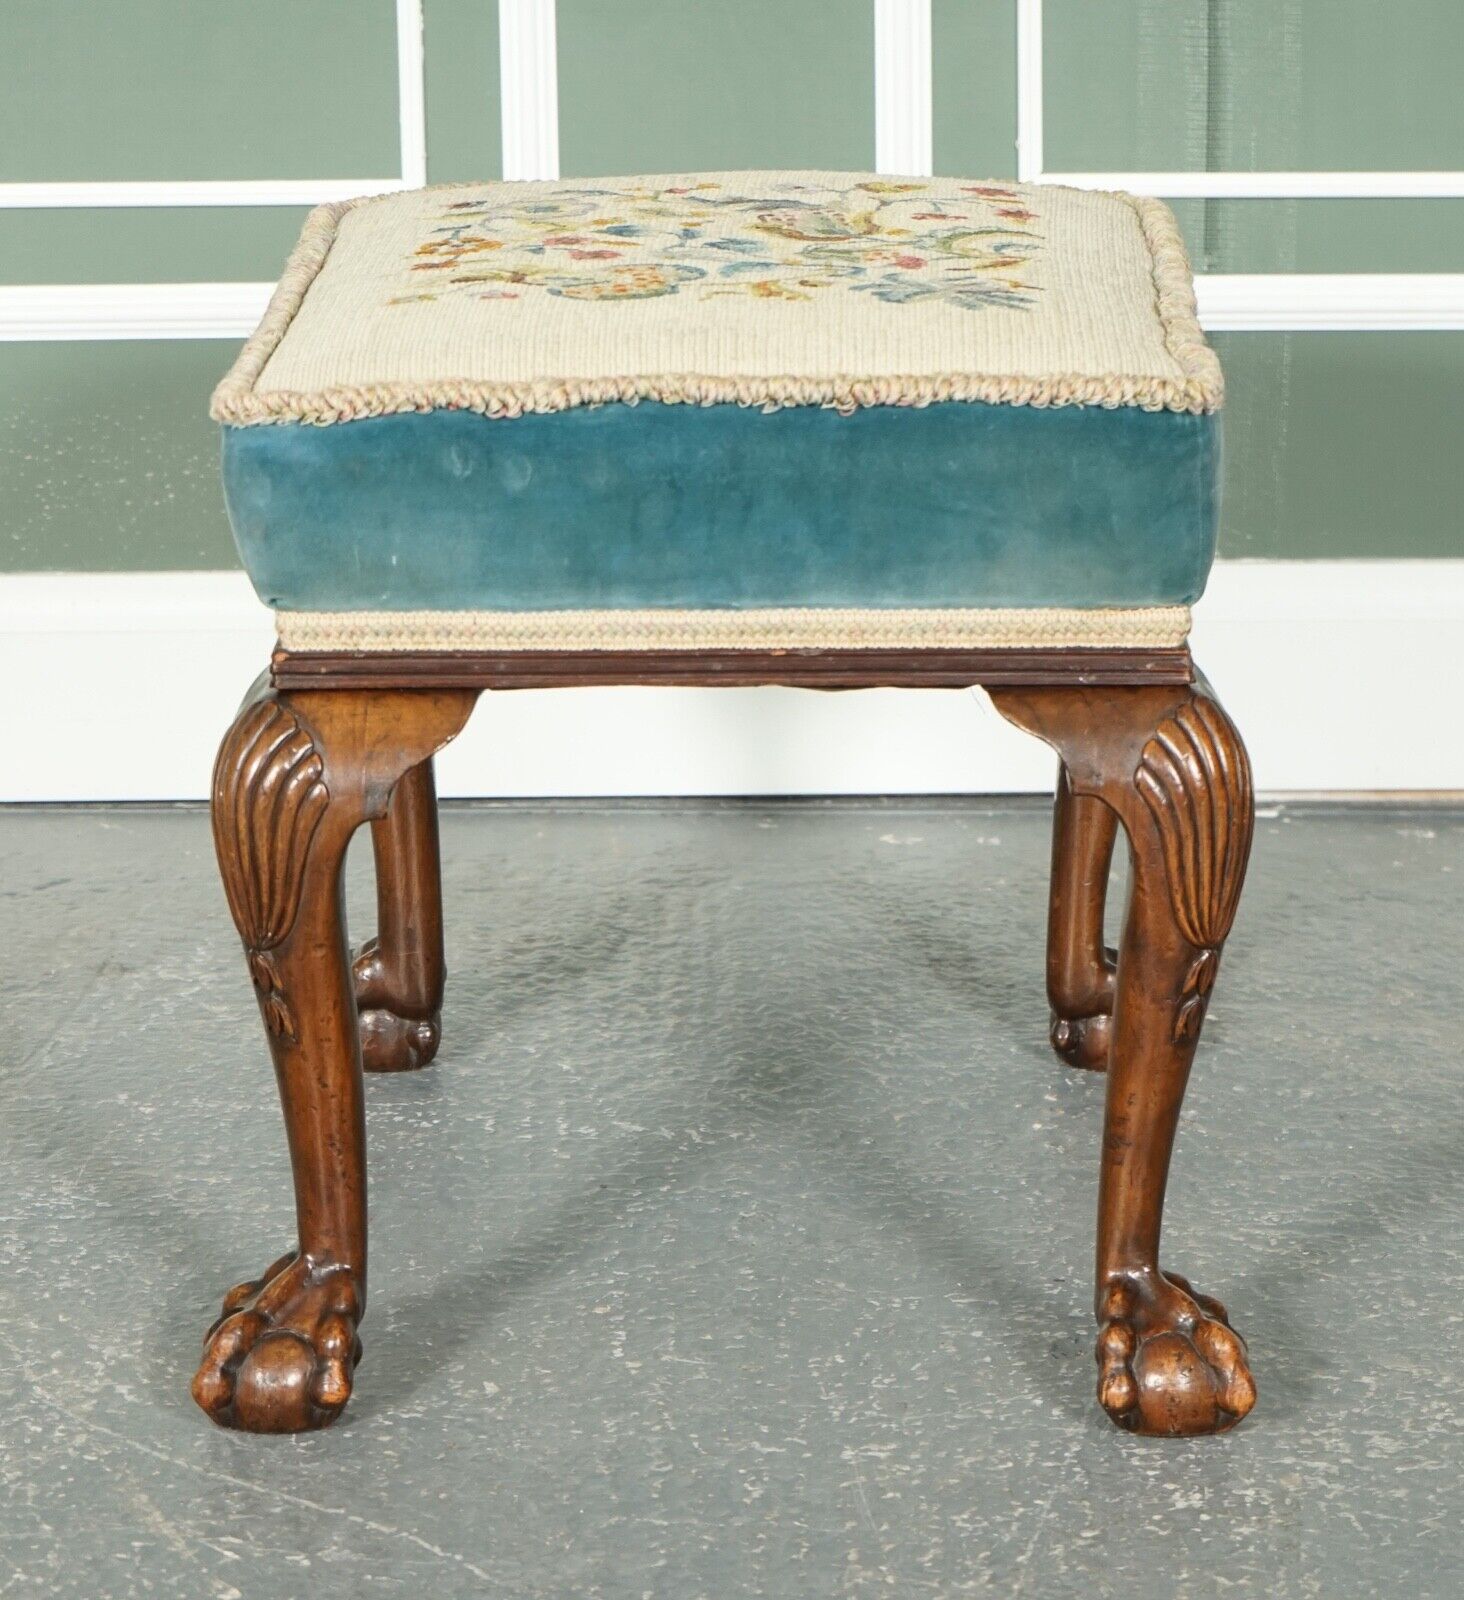 FINE LATE VICTORIAN FLOWER UPHOLSTERY CLAW AND BALL FOOT STOOL